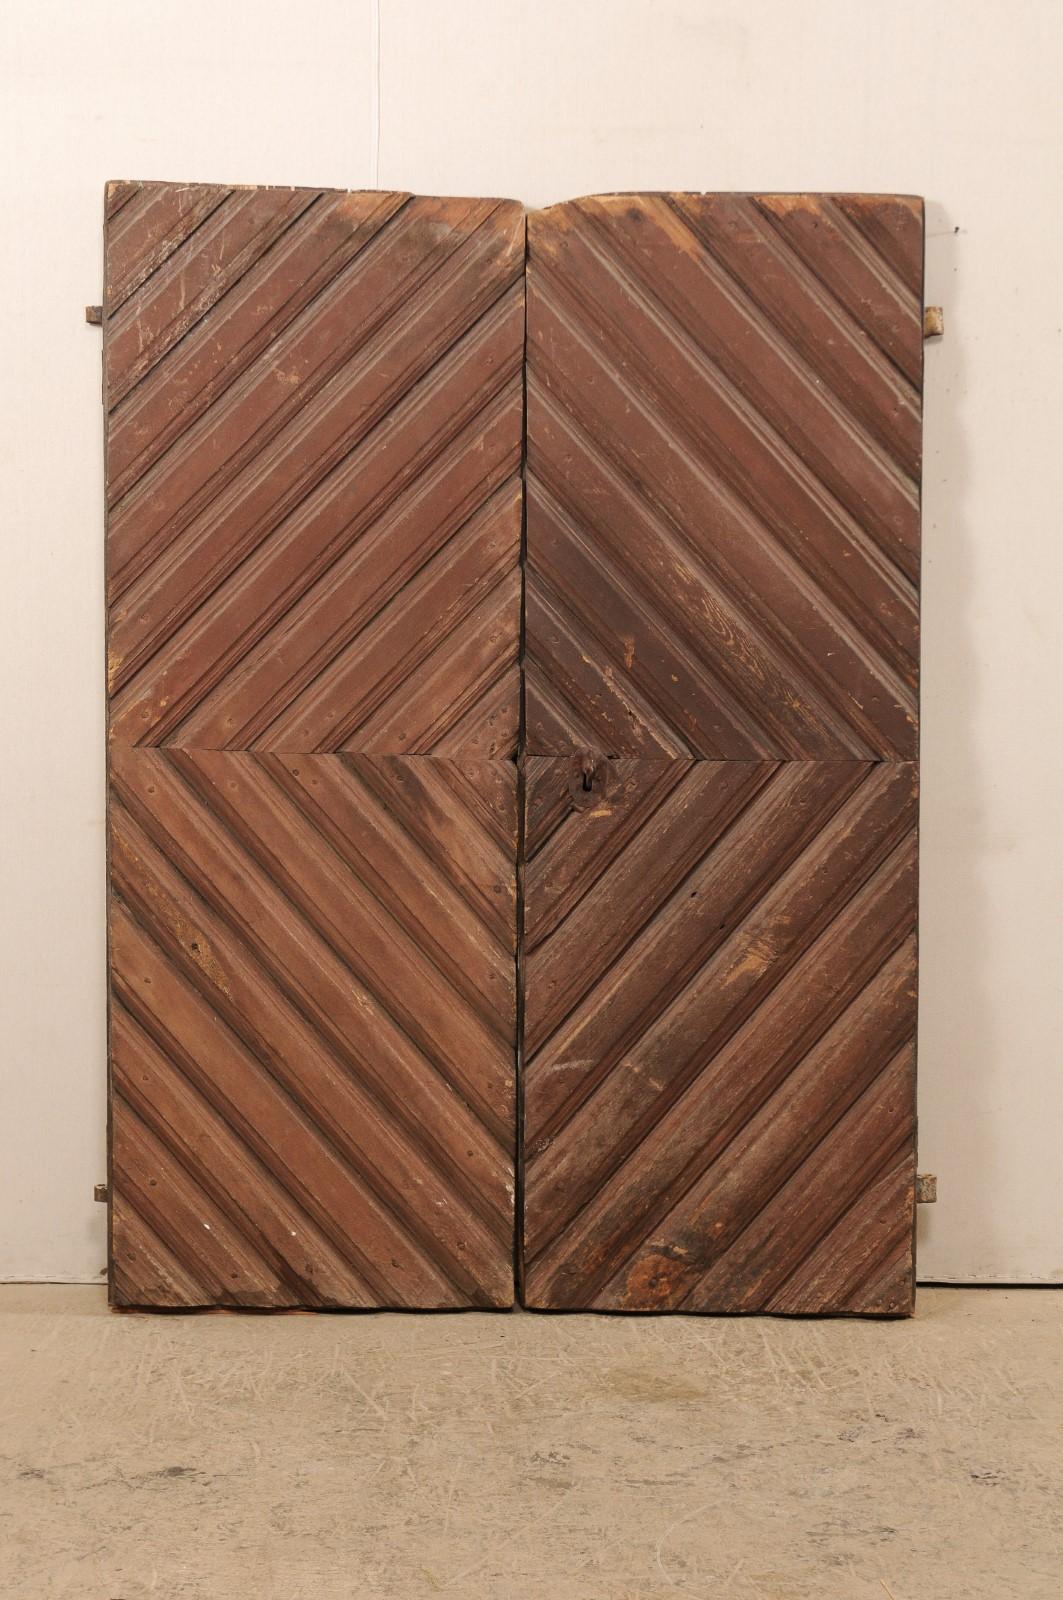 A pair of Swedish doors with geometric patterns and original paint from the 19th century. This pair of antique doors from Sweden feature a repeating diamond pattern, comprised of a smaller diamond being made up where doors join when closed, at